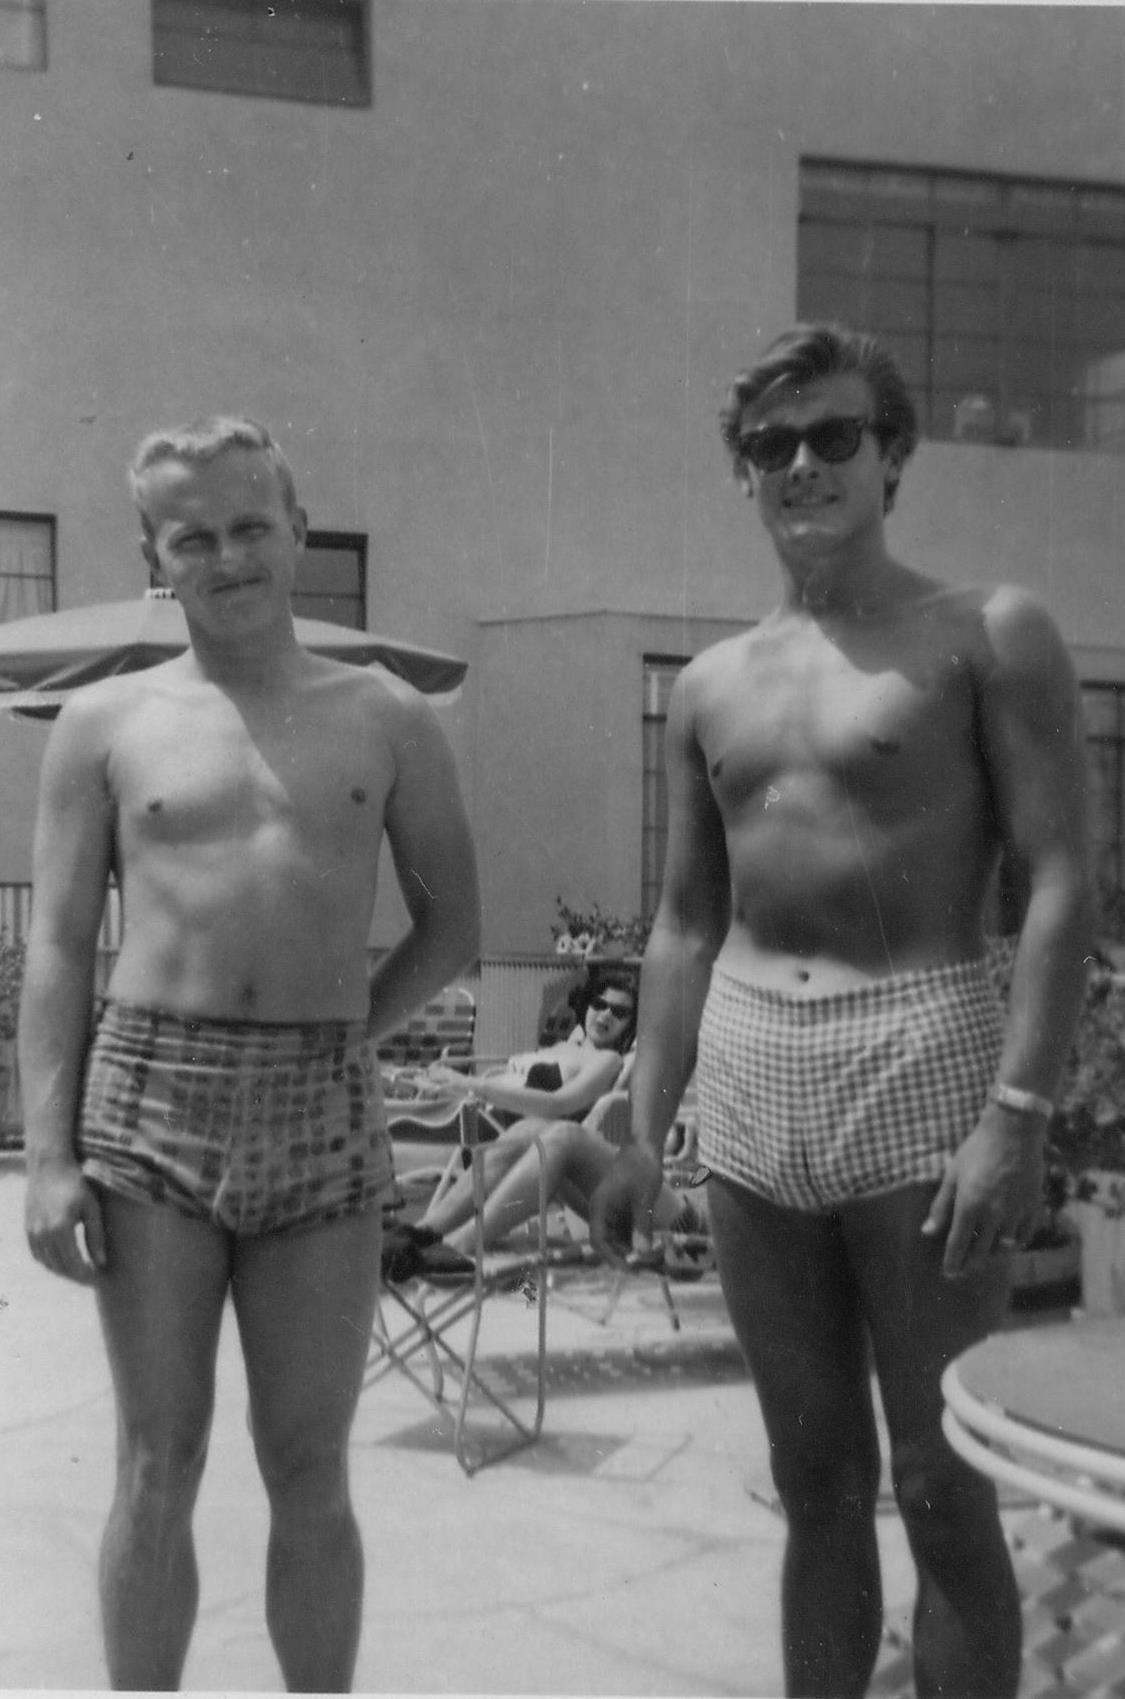 roger moore and jerry bowles - sir roger moore photo (16265090 ...